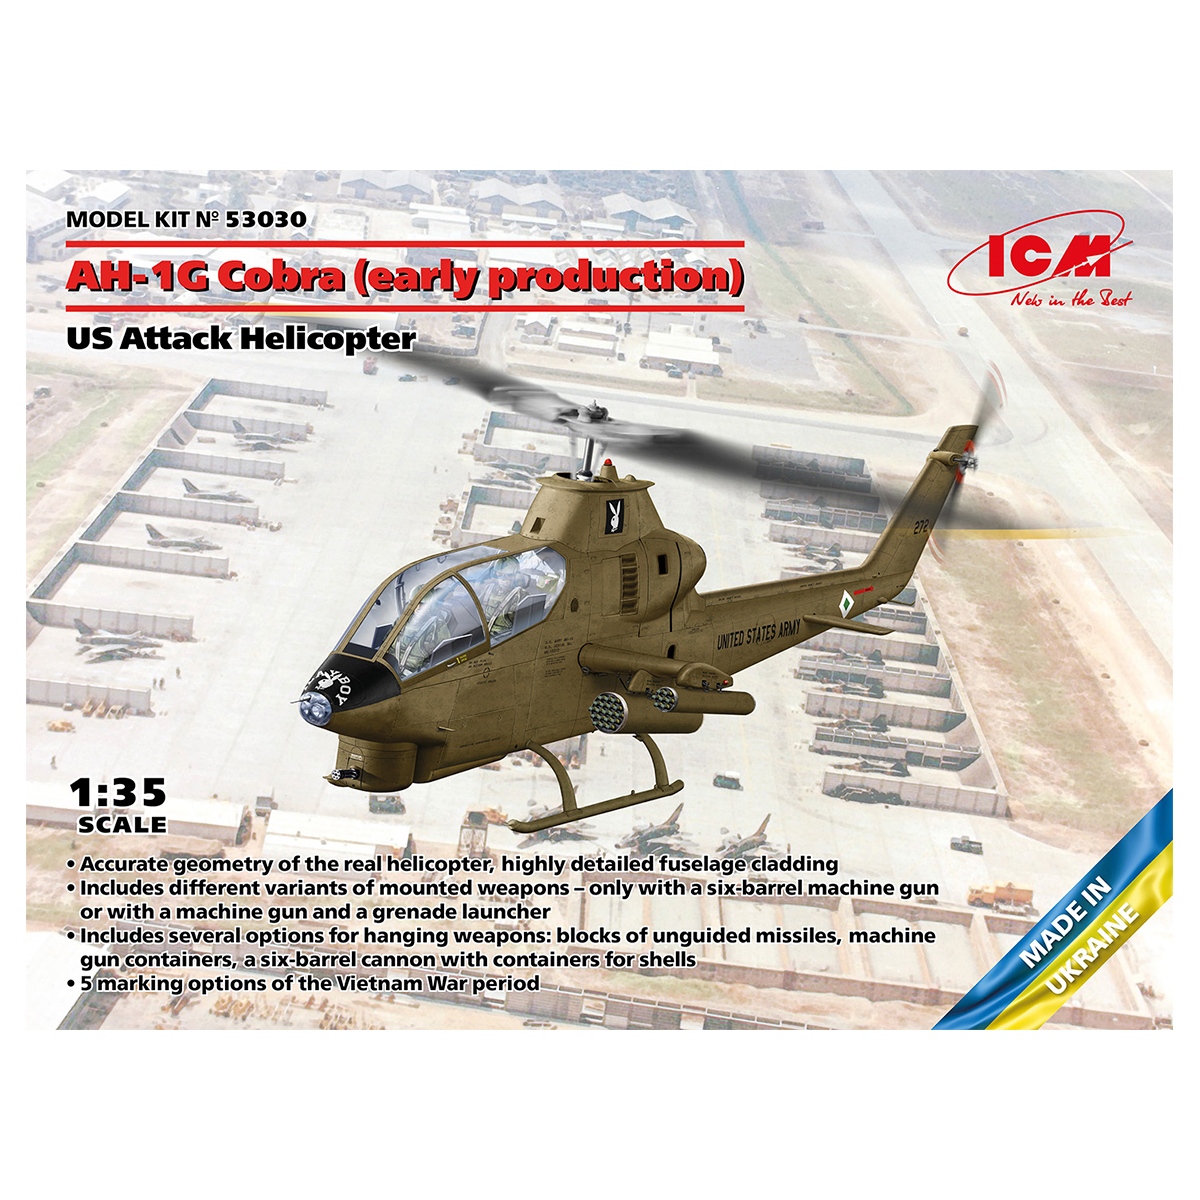 AH-1G Cobra (early production), US Attack Helicopter 1/35